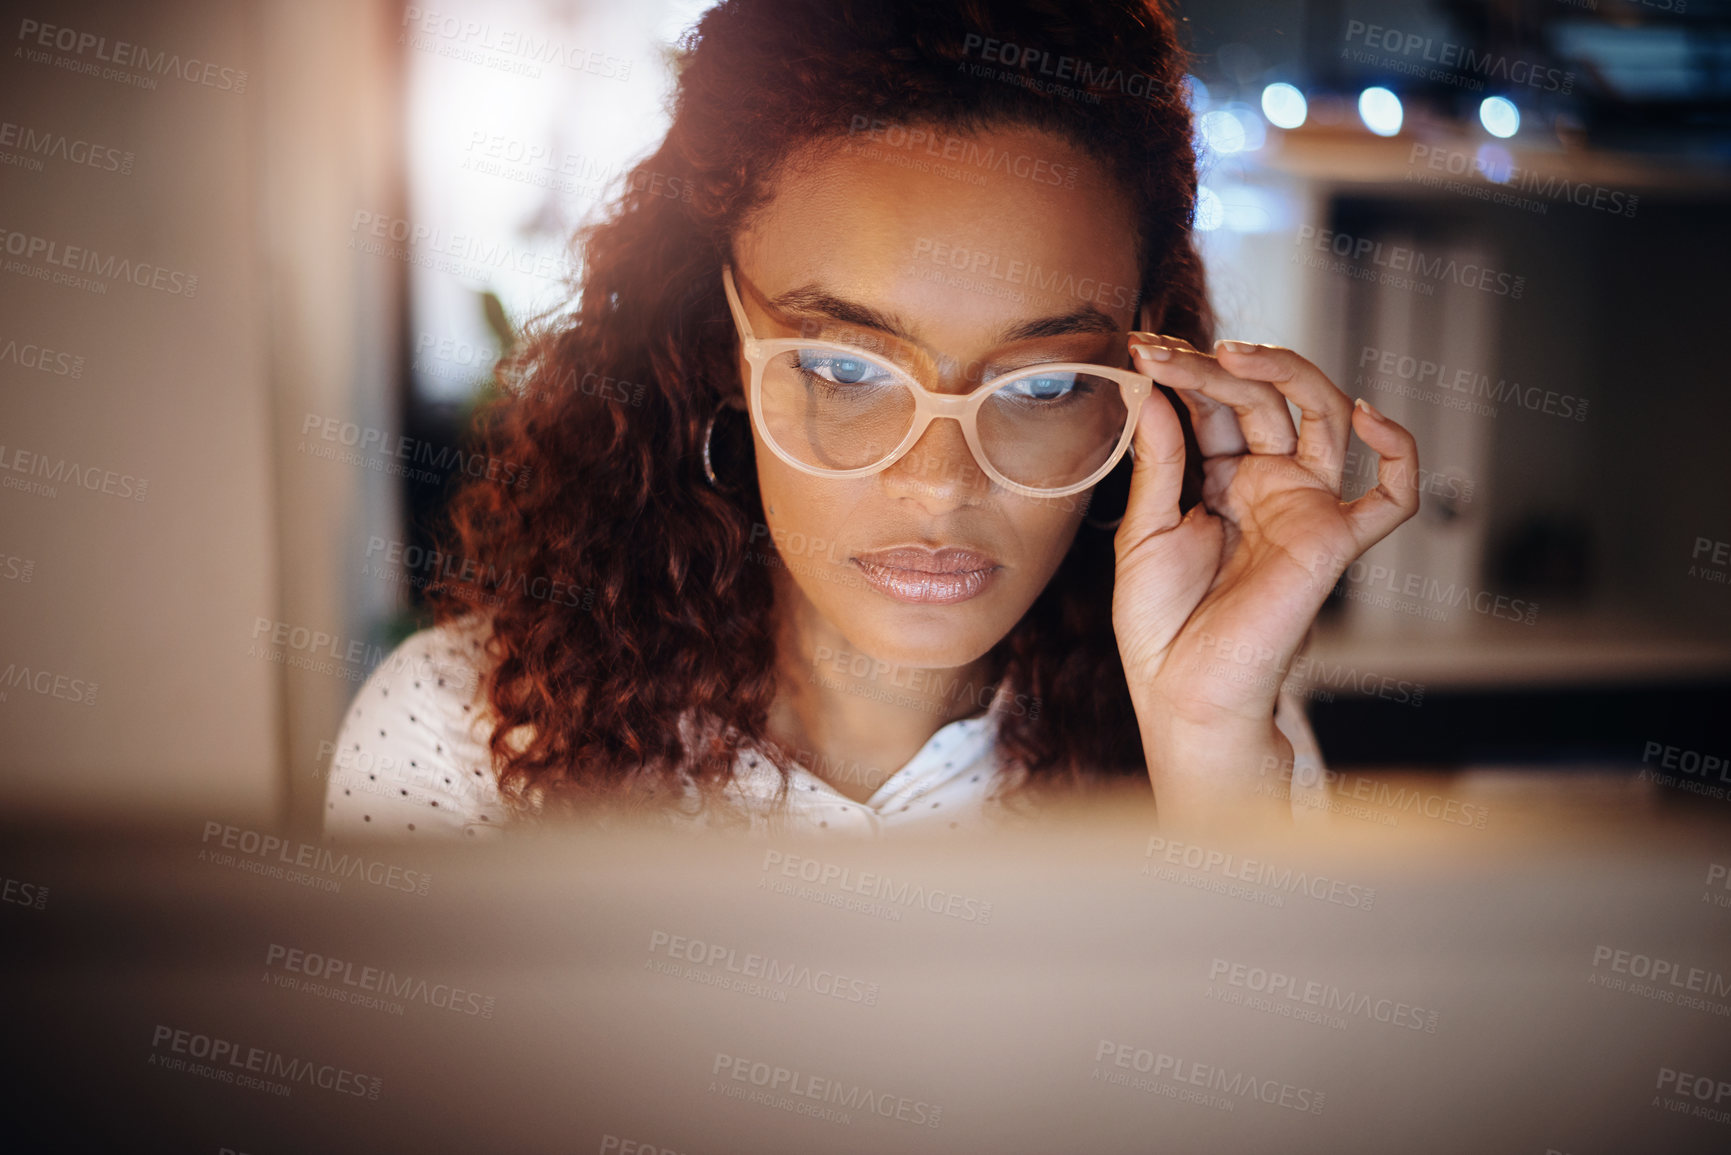 Buy stock photo Shot of a young businesswoman working on a computer in an office at night